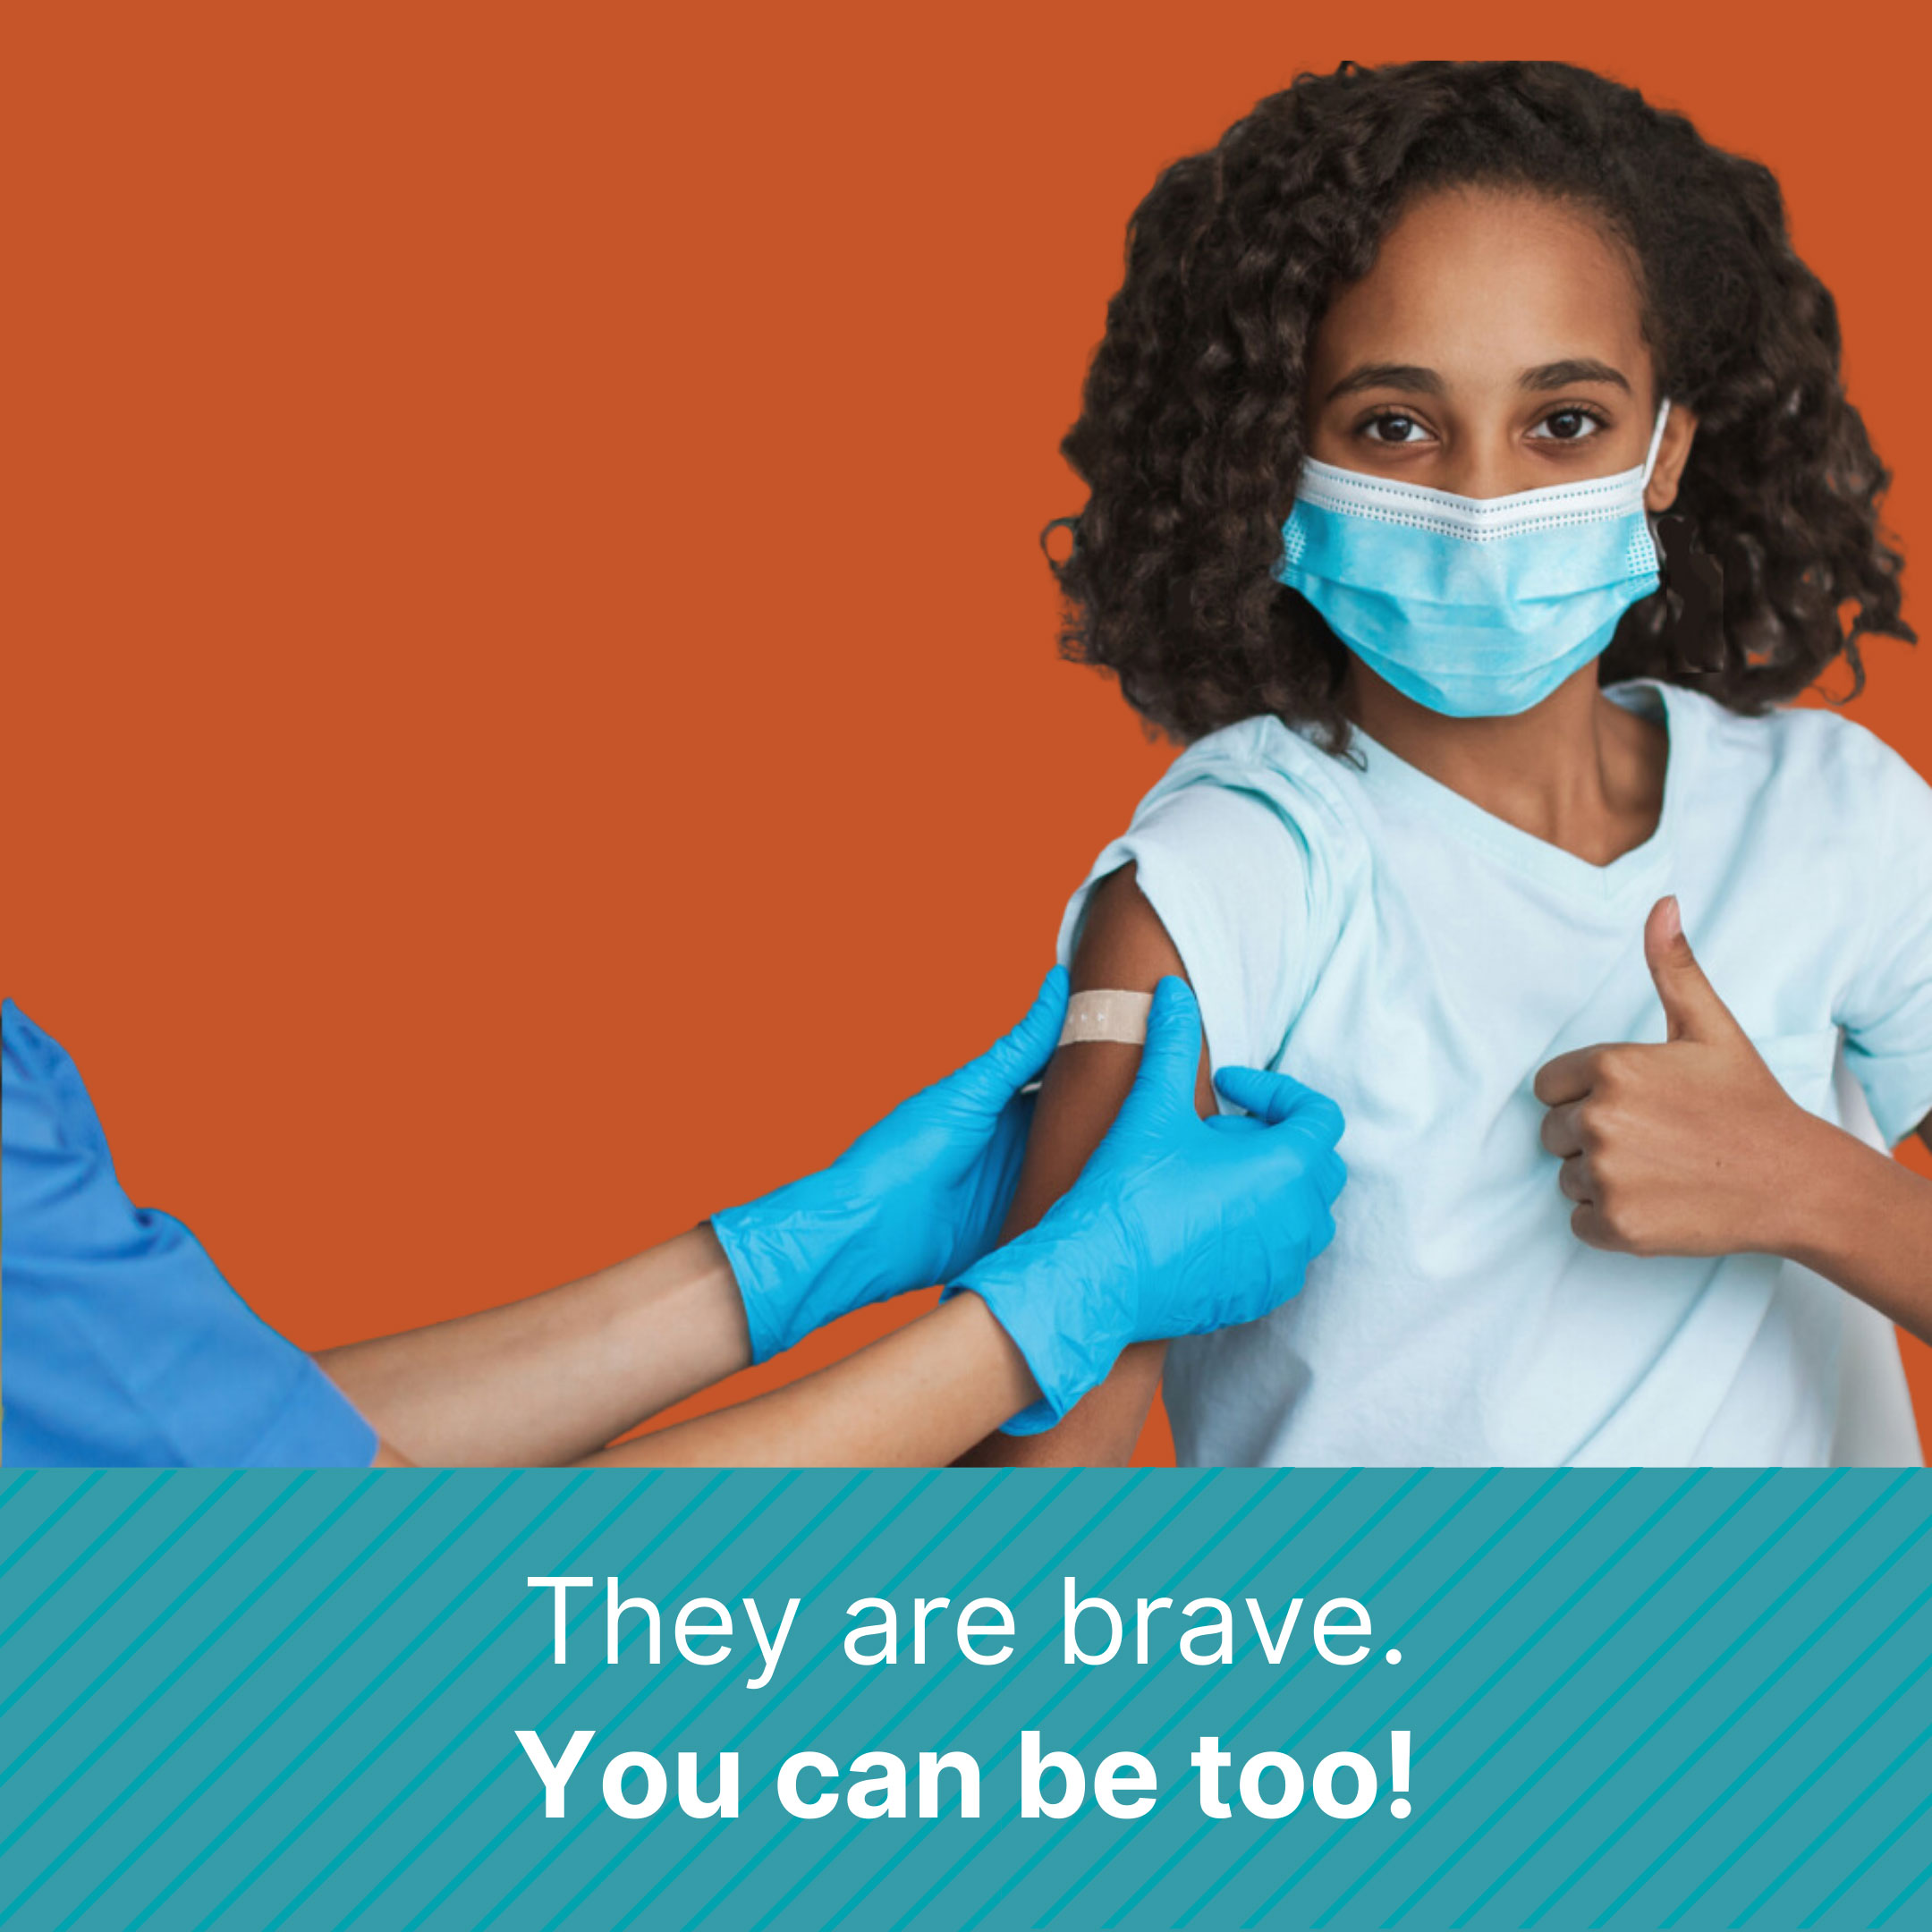 Child with a band-aid right after getting vaccinated by a nurse. Text says: They are brave. You can be too!.